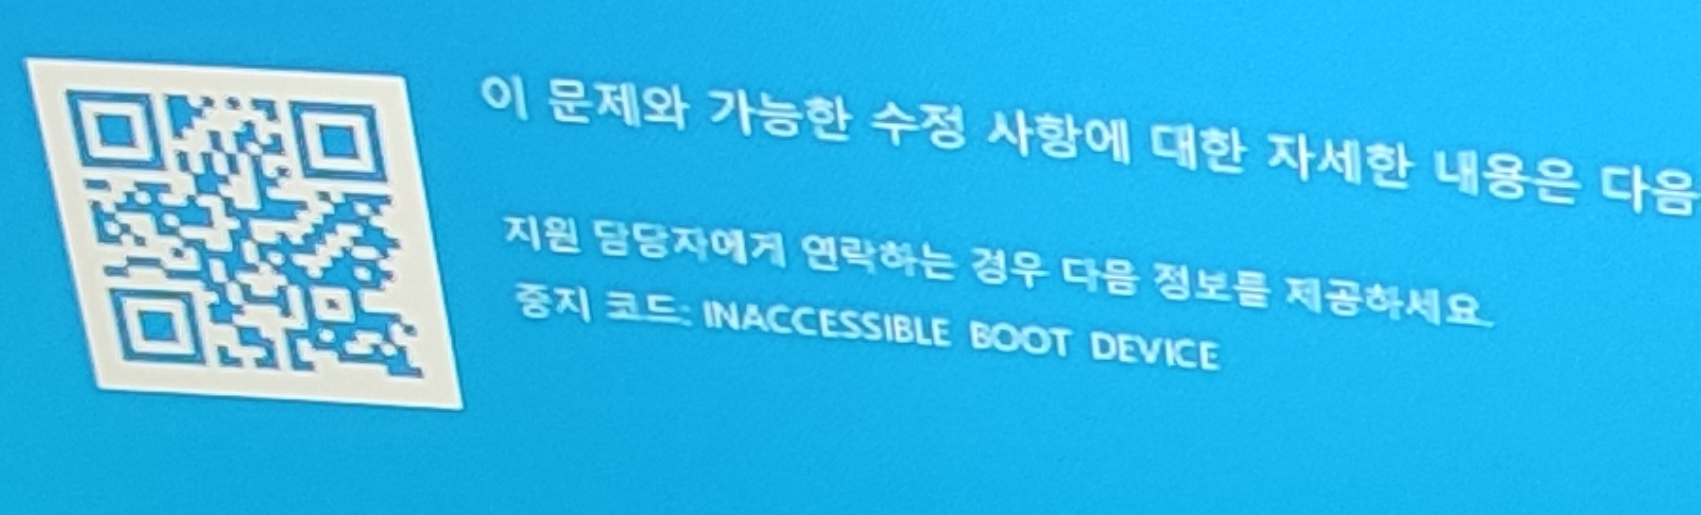 IN ACCESSIBLE BOOT DEVICE